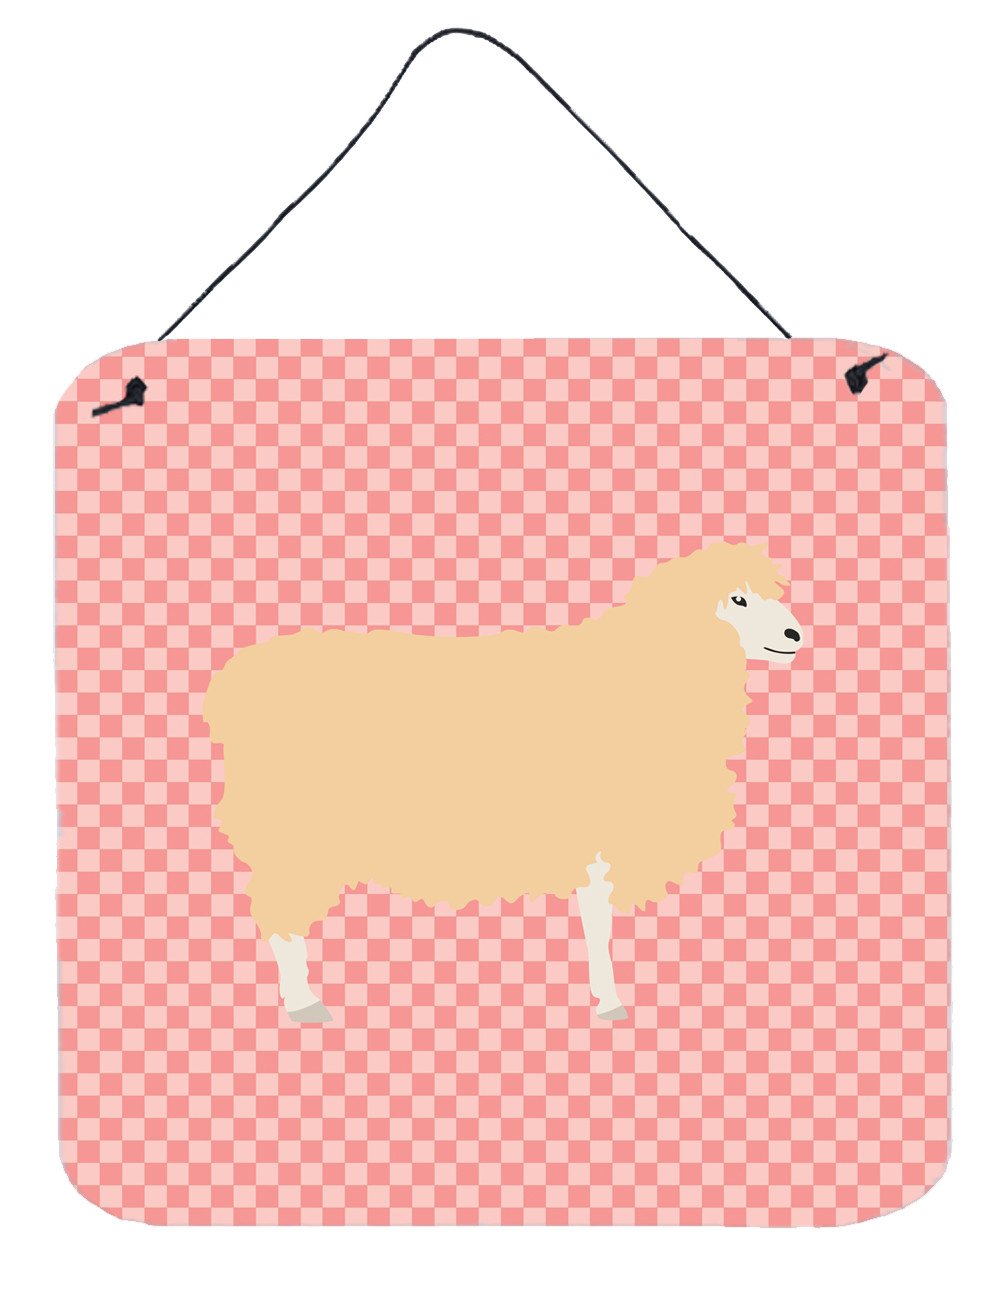 English Leicester Longwool Sheep Pink Check Wall or Door Hanging Prints BB7974DS66 by Caroline's Treasures